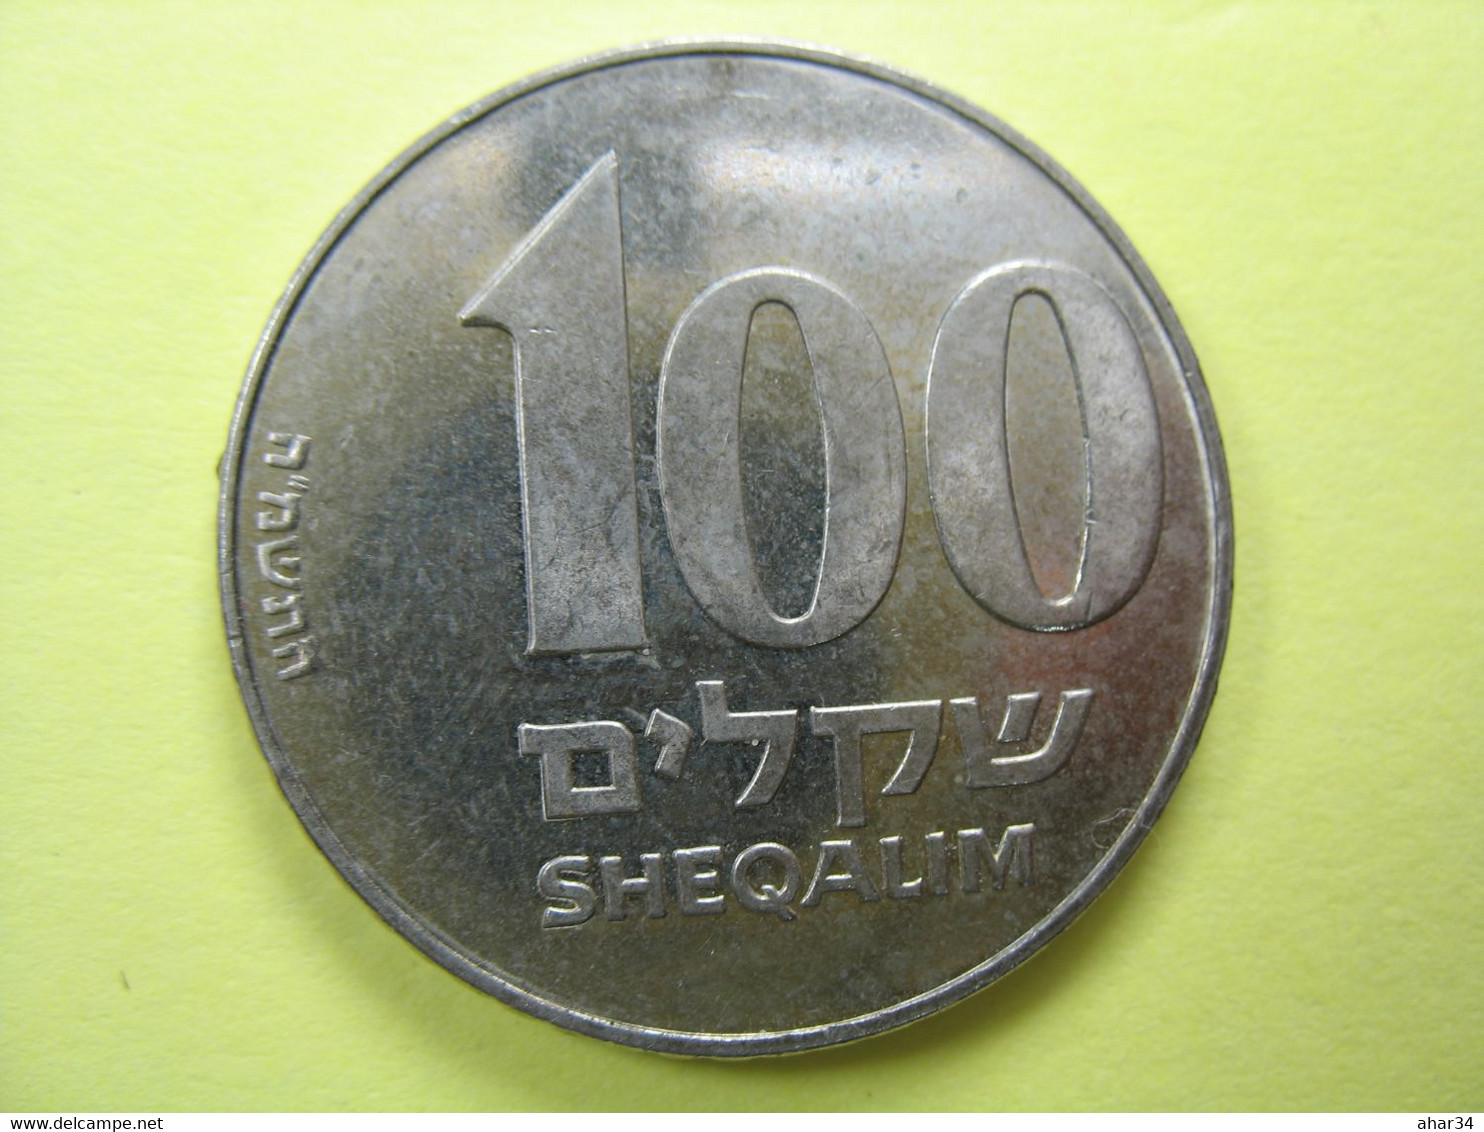 TEMPLATE LISTING ISRAEL  LOT OF  10 COINS 100 SHEQALIM 1985 JABOTINSKY  UNC COIN. - Other - Asia